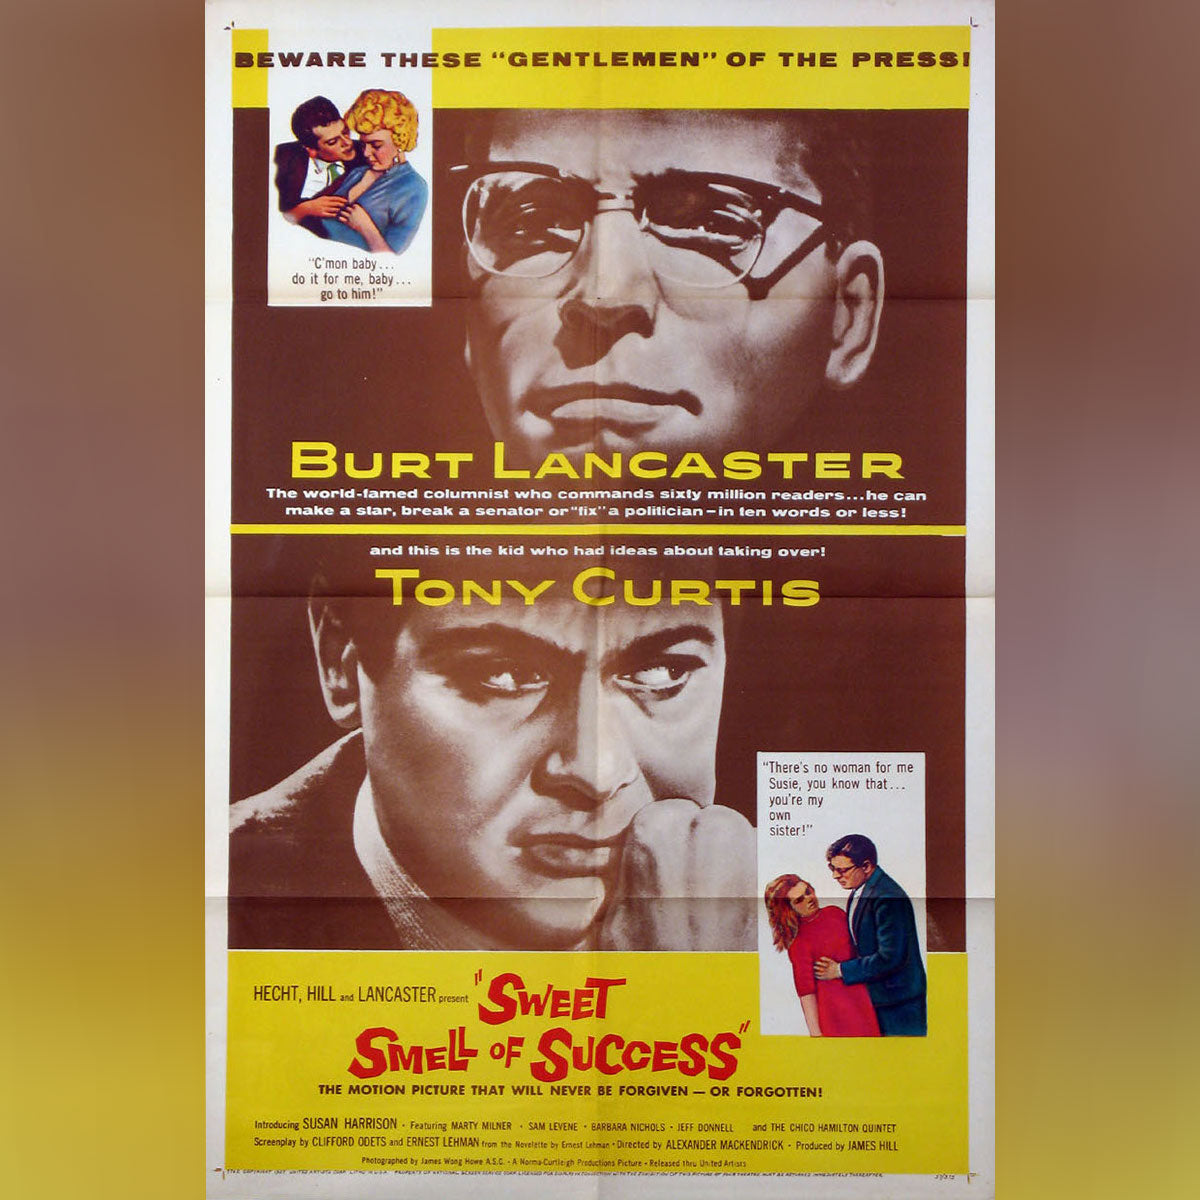 Sweet Smell of Success (1957)